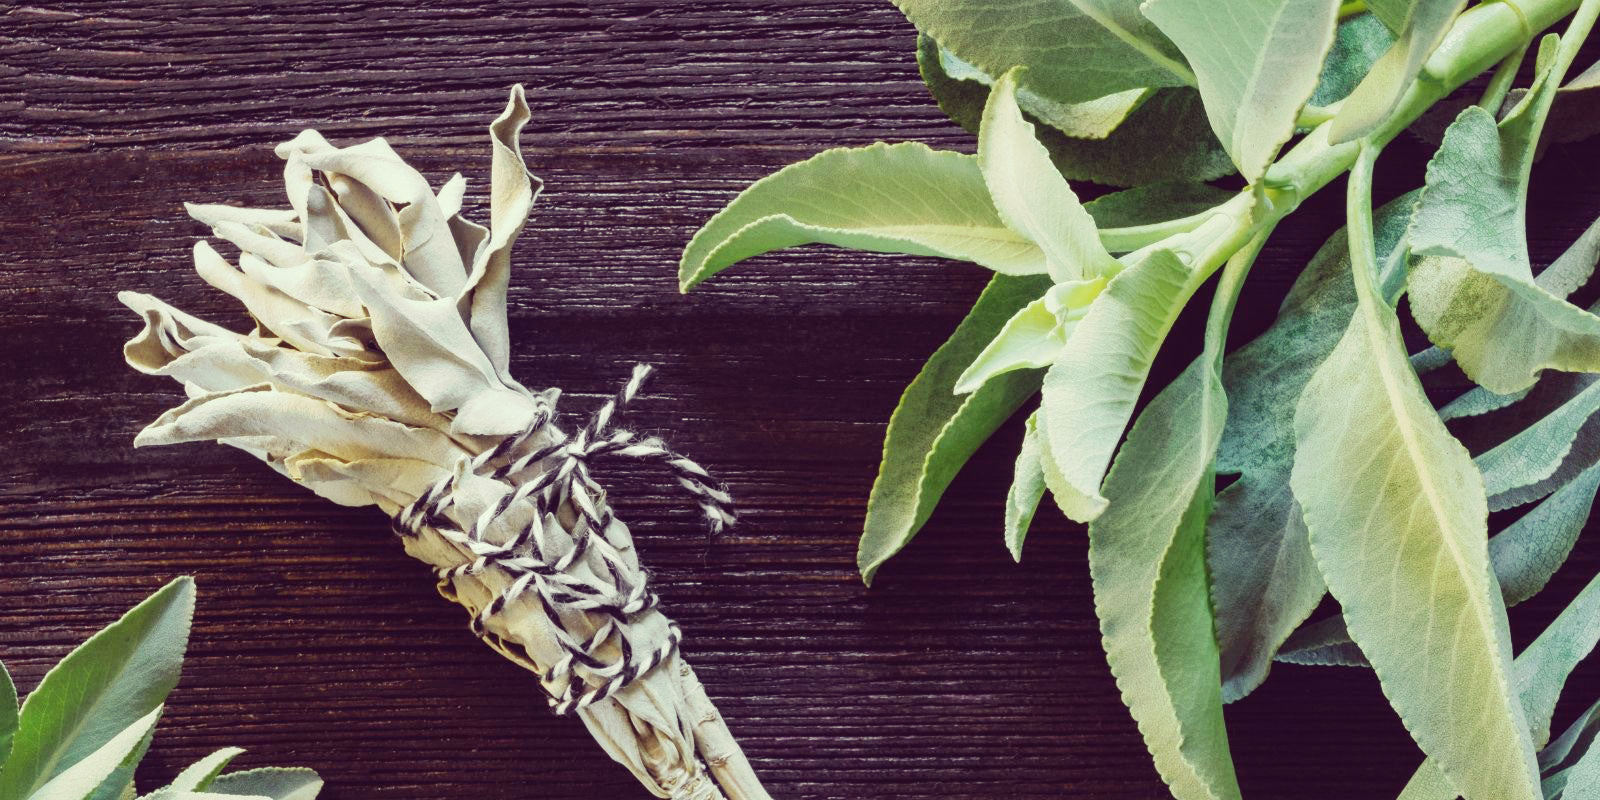 White sage for smudging.